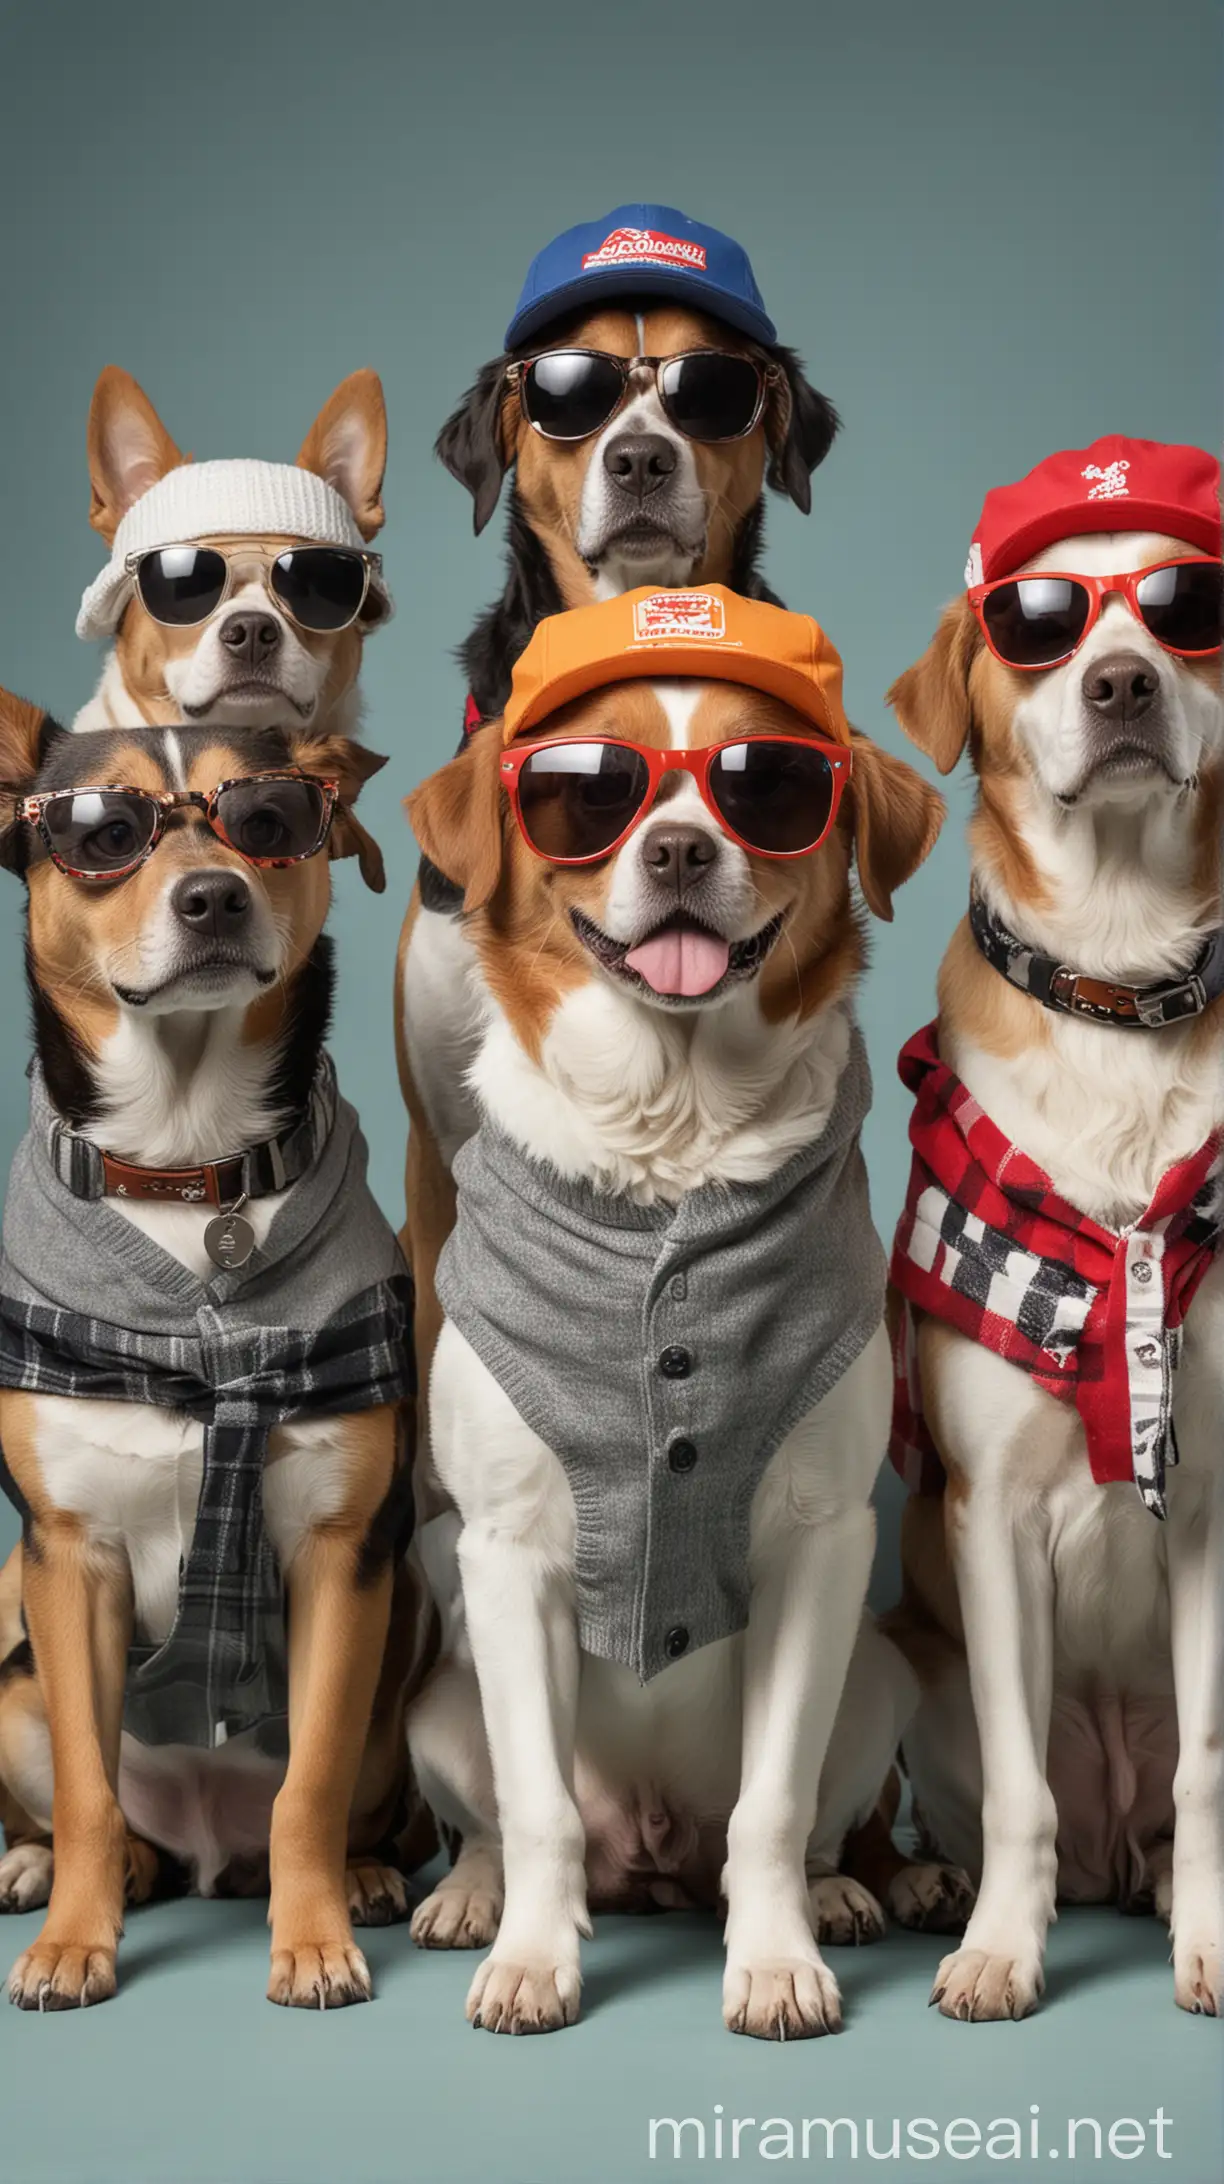 Diverse Group of Dogs in Stylish Clothing and Sunglasses